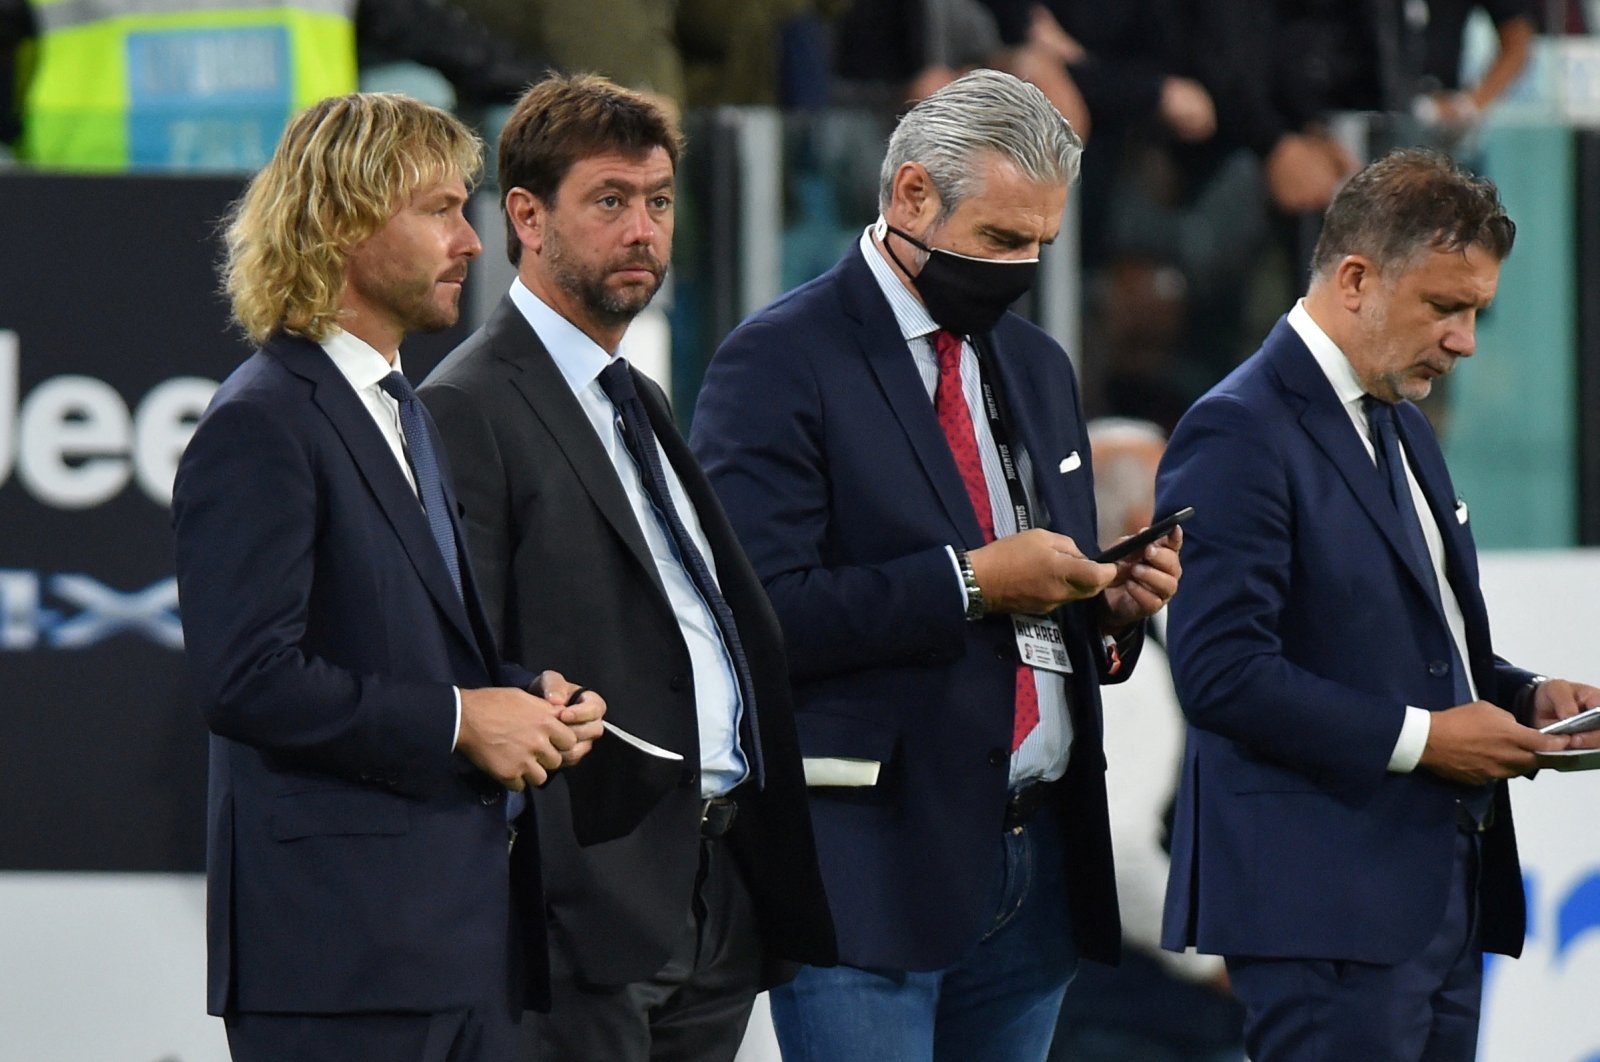 Juventus President Andrea Agnelli and Pavel Nedved, vice chairperson of the board of directors, before the match at the Allianz Stadium, Turin, Italy, Sept. 19, 2021. (Reuters Photo)